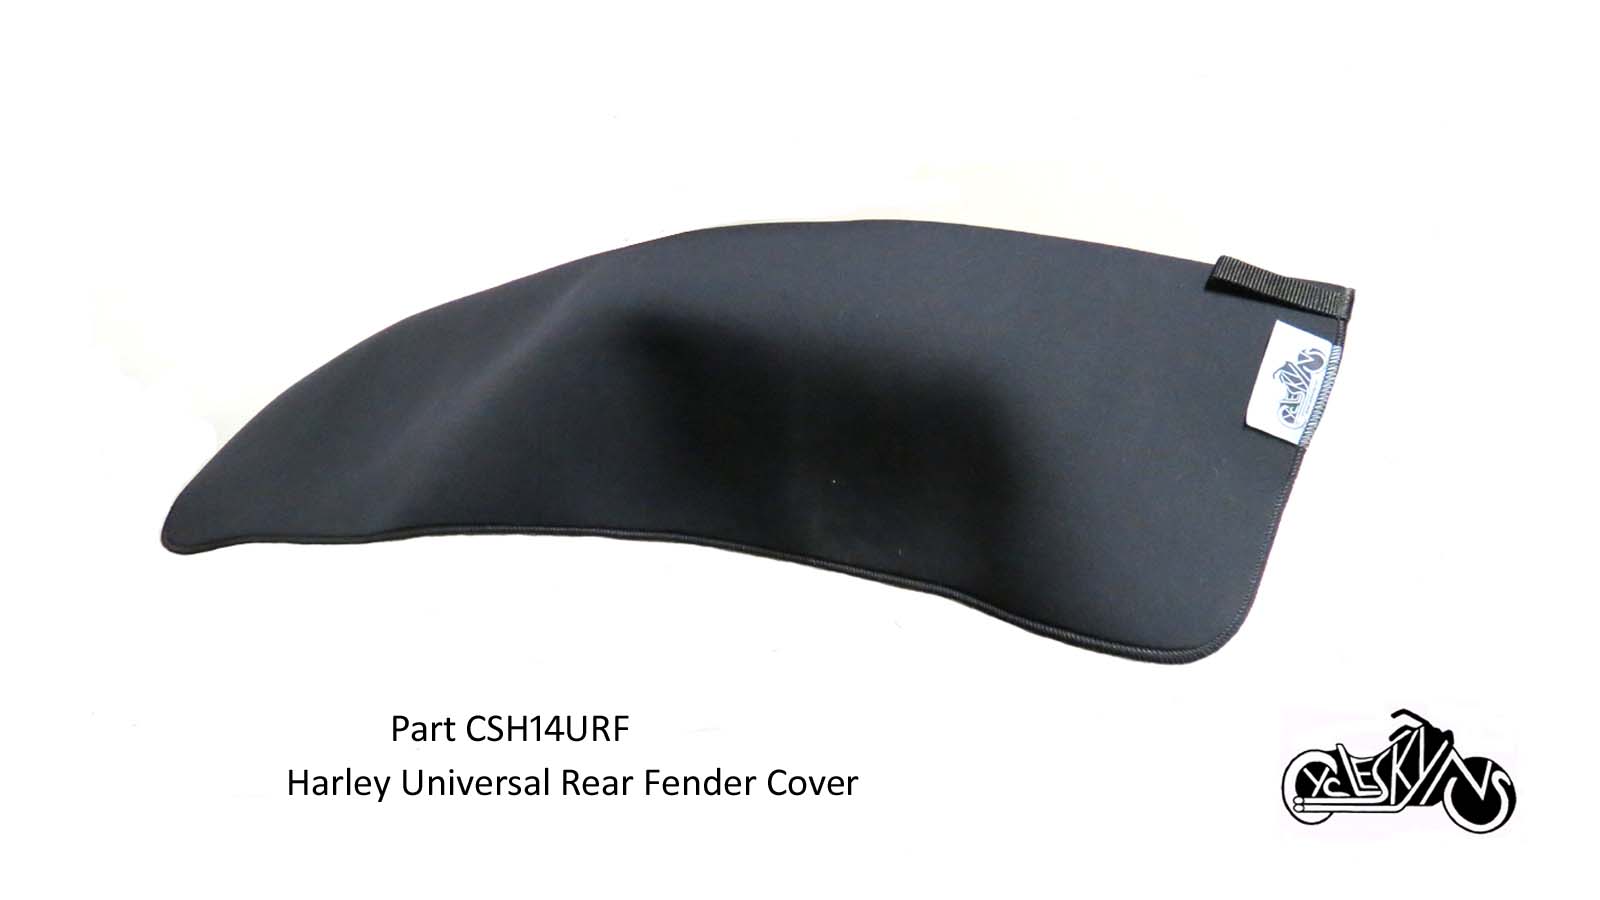 Neoprene Protective mechanic's Cover designed to cover the Harley Davidson motorcycle Rear fender. This is a universal flat cover for use on other areas of the motorcycle as well.